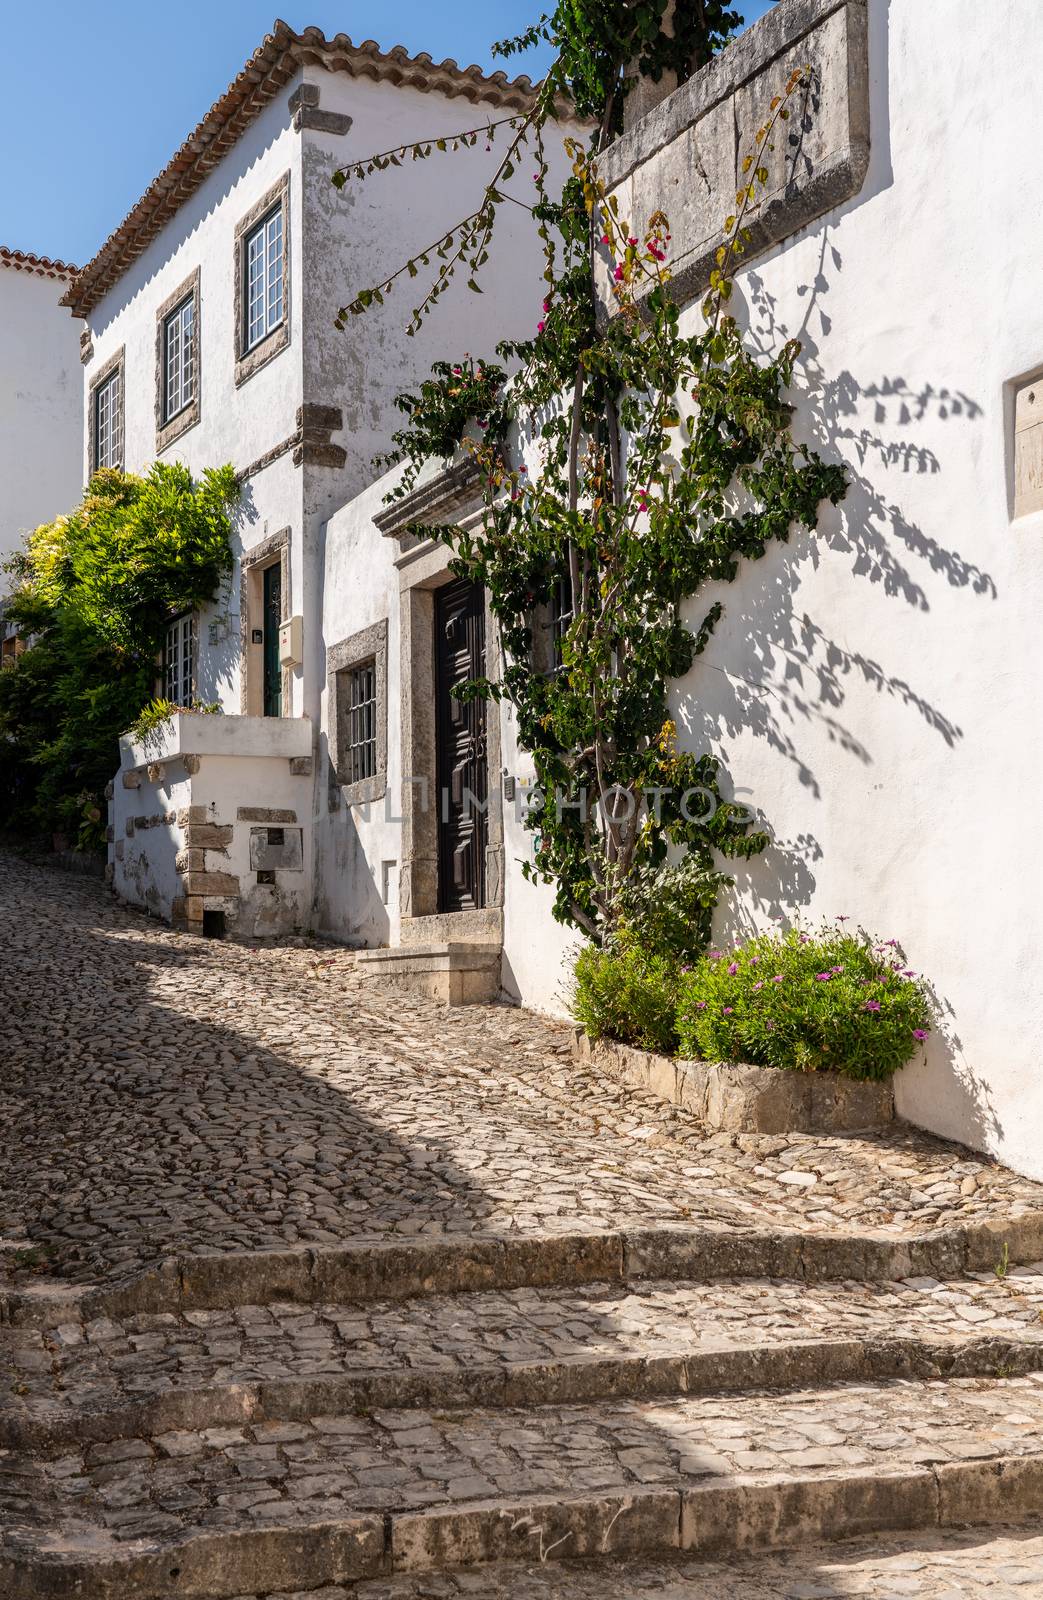 Narrow street in the old walled town of Obidos in central Portugal by steheap